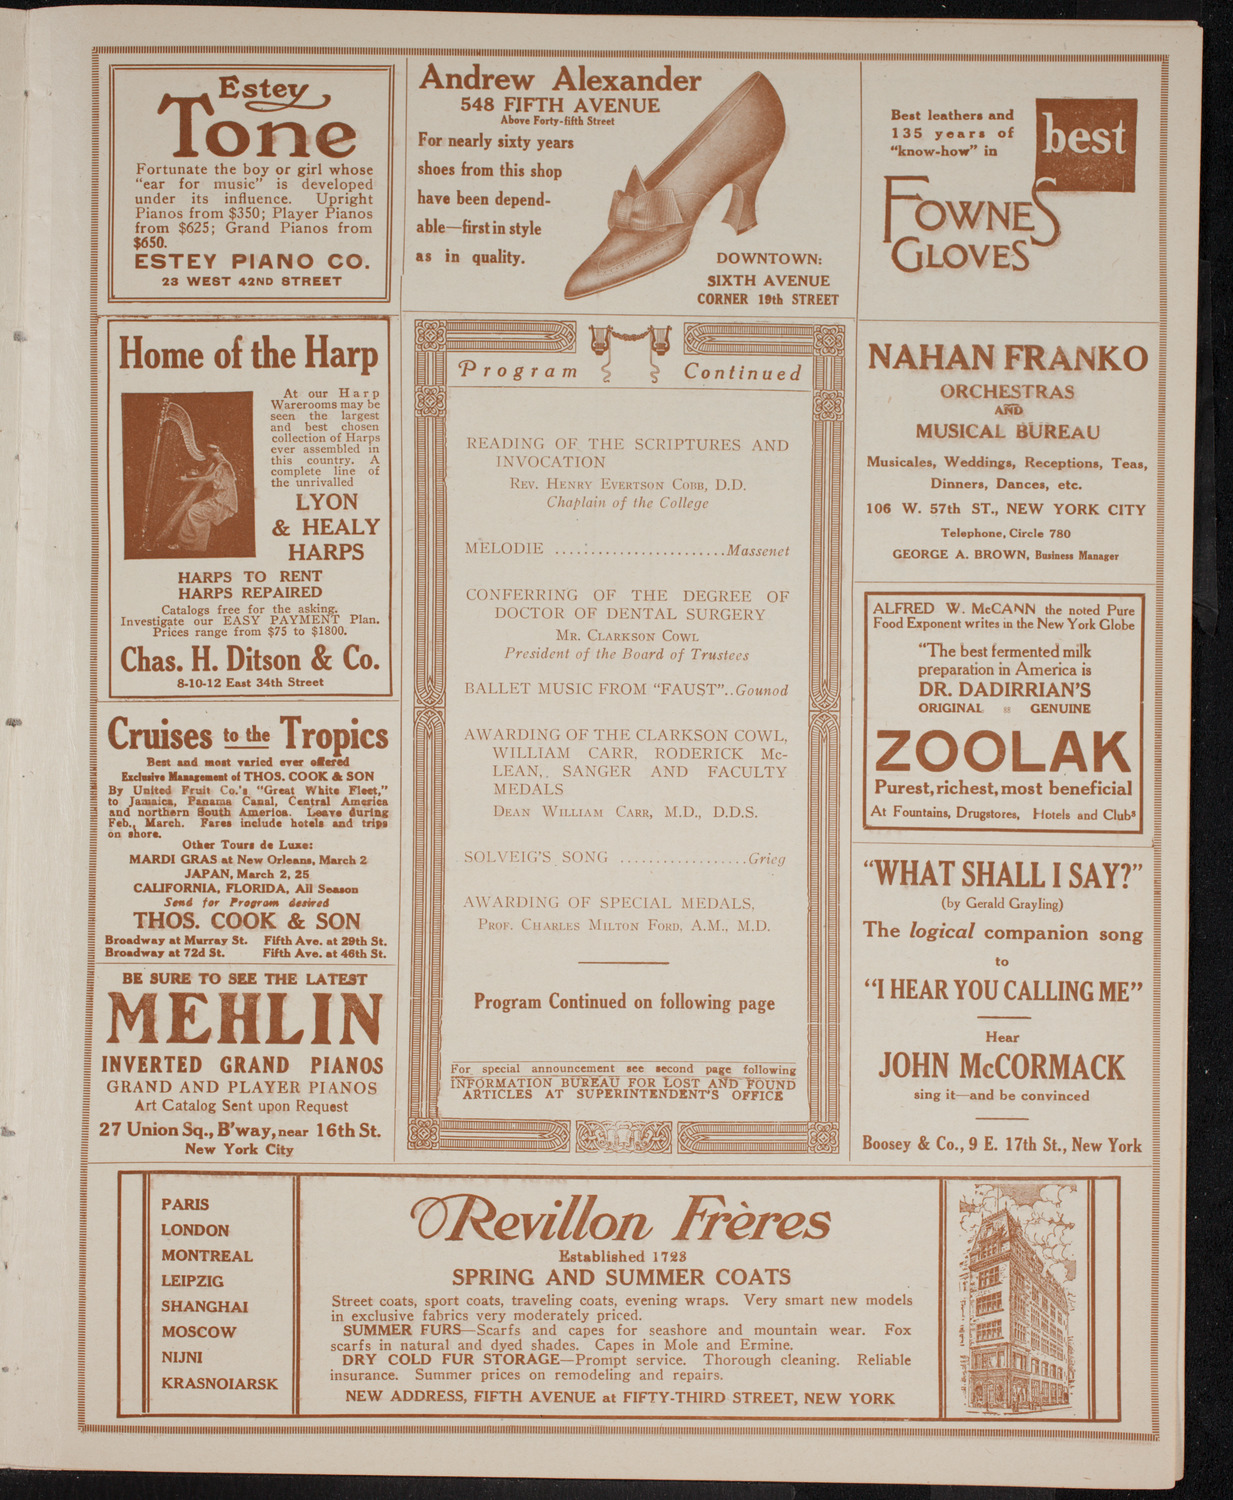 Graduation: College of Dental and Oral Surgery of New York, June 6, 1916, program page 7